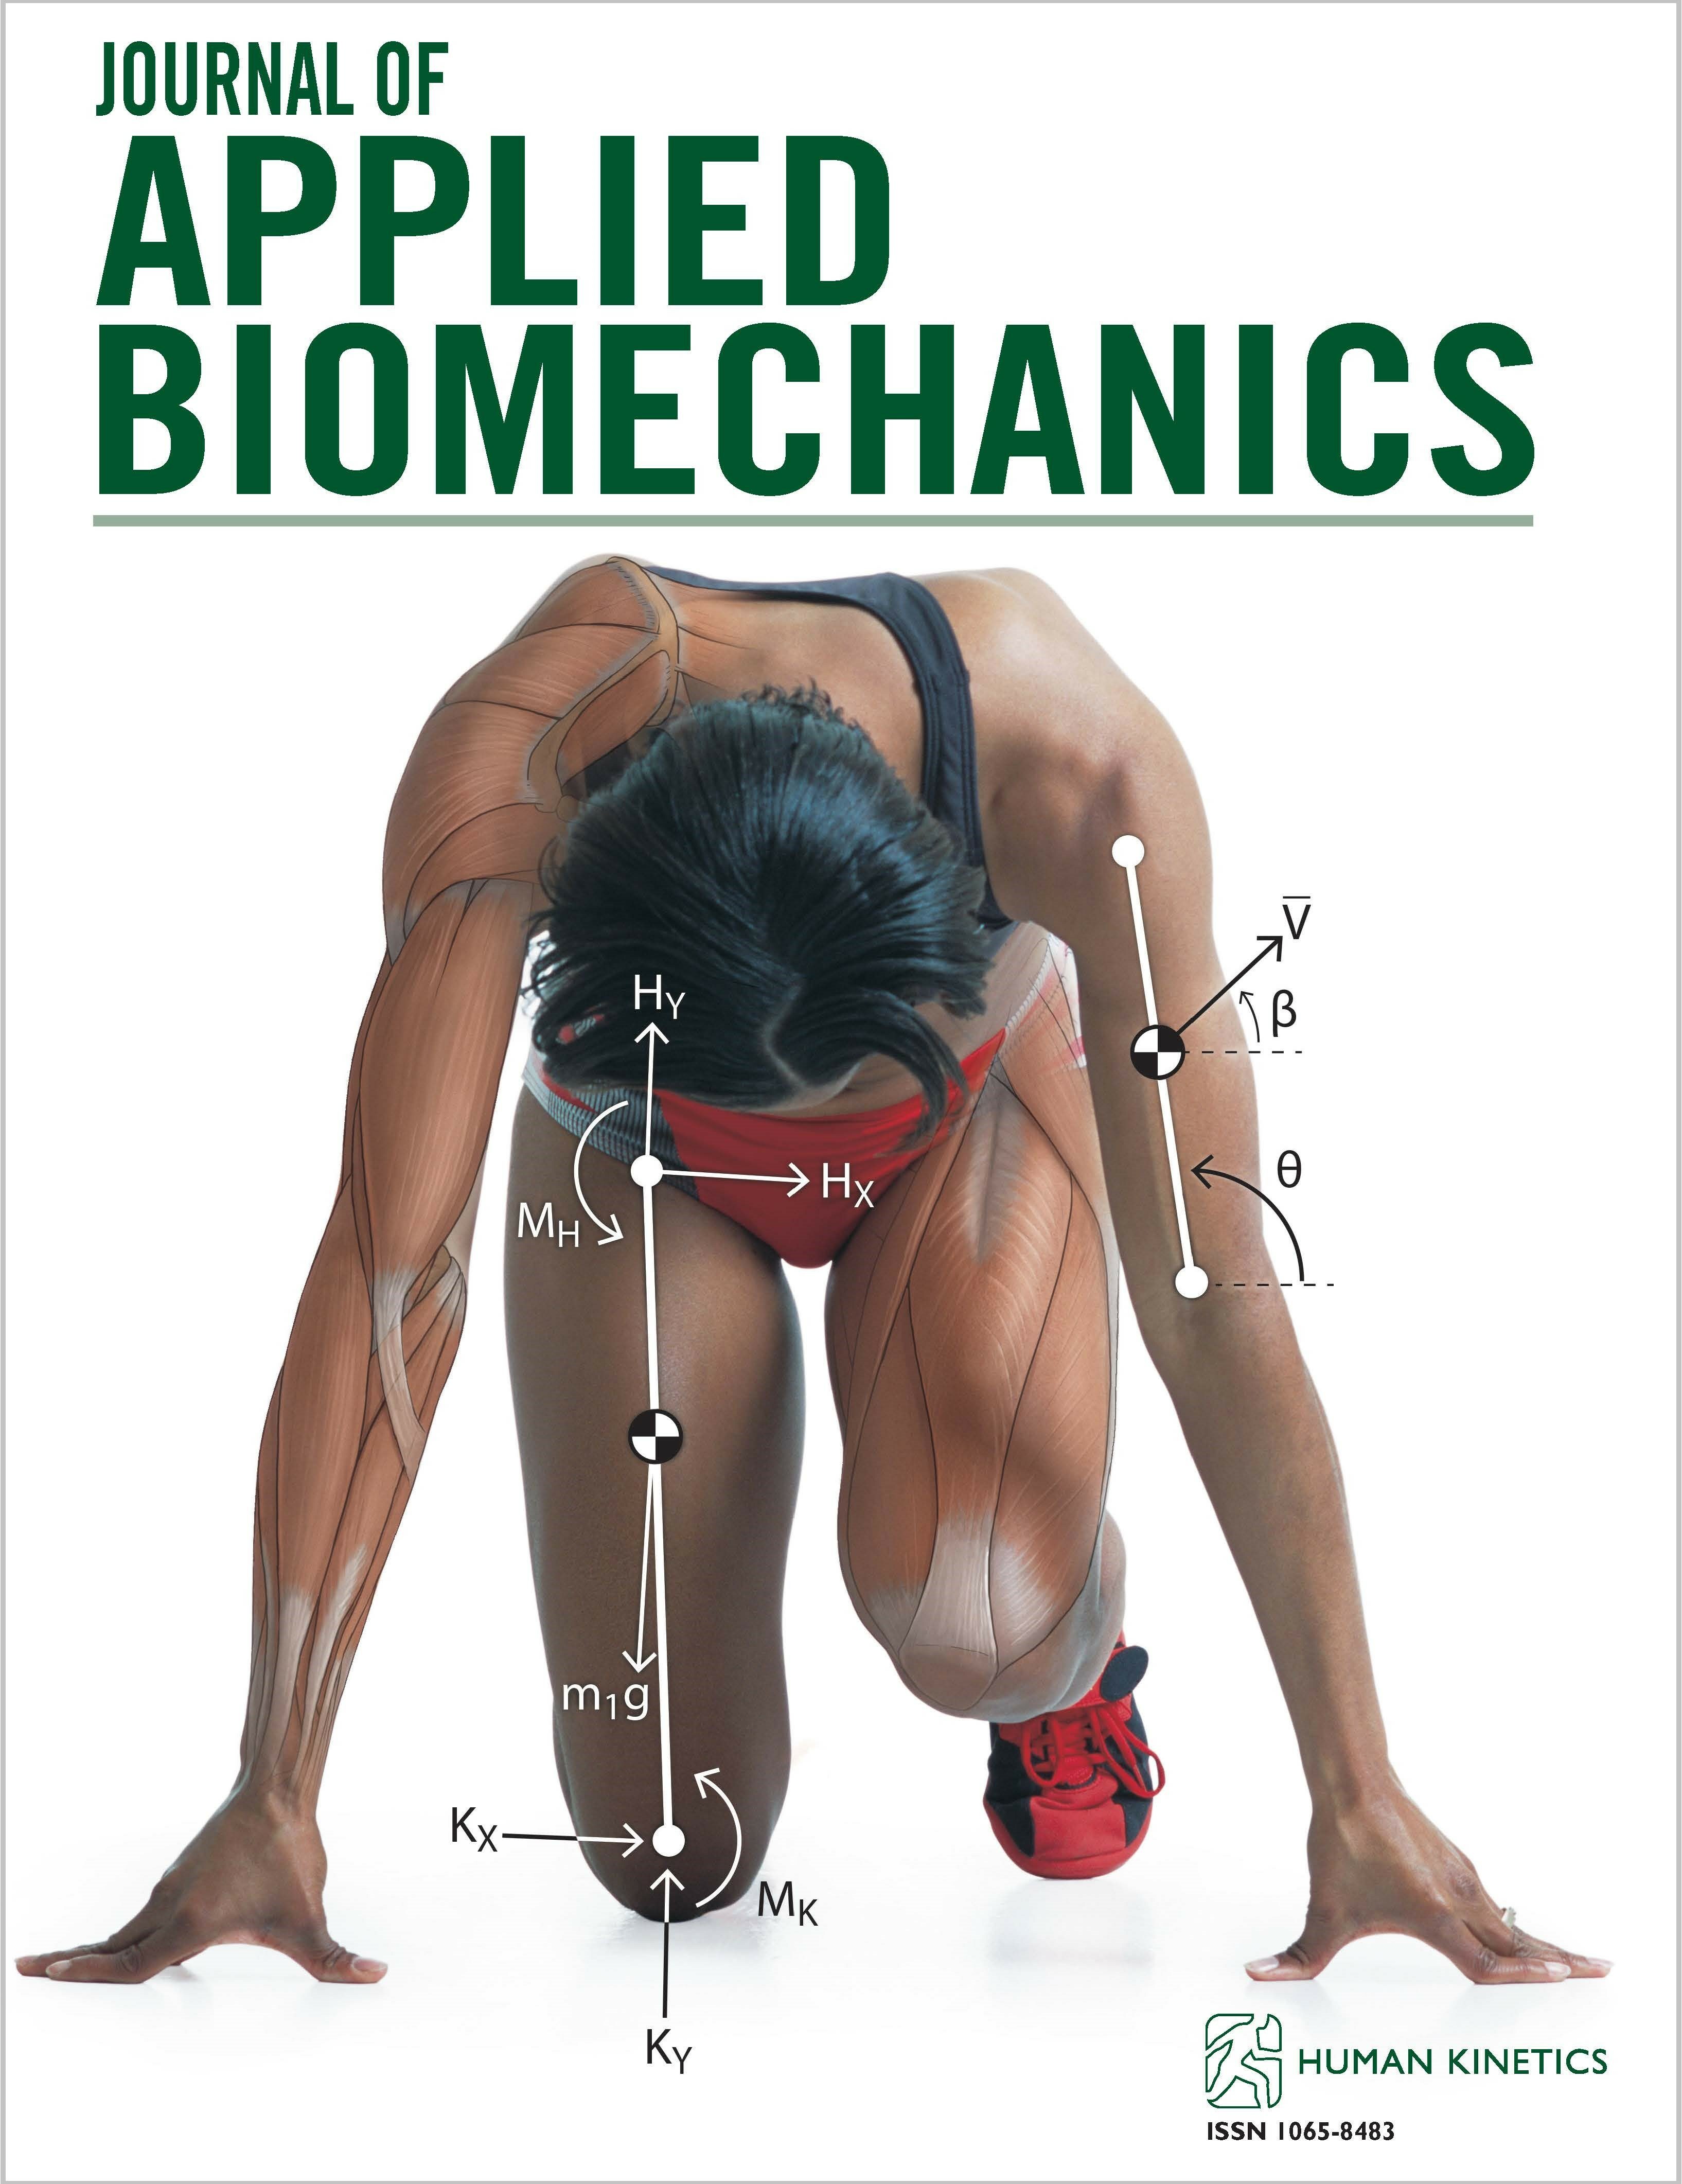 The Biomechanics Research and Innovation Challenge: Development, Implementation, Uptake, and Reflections on the Inaugural Program